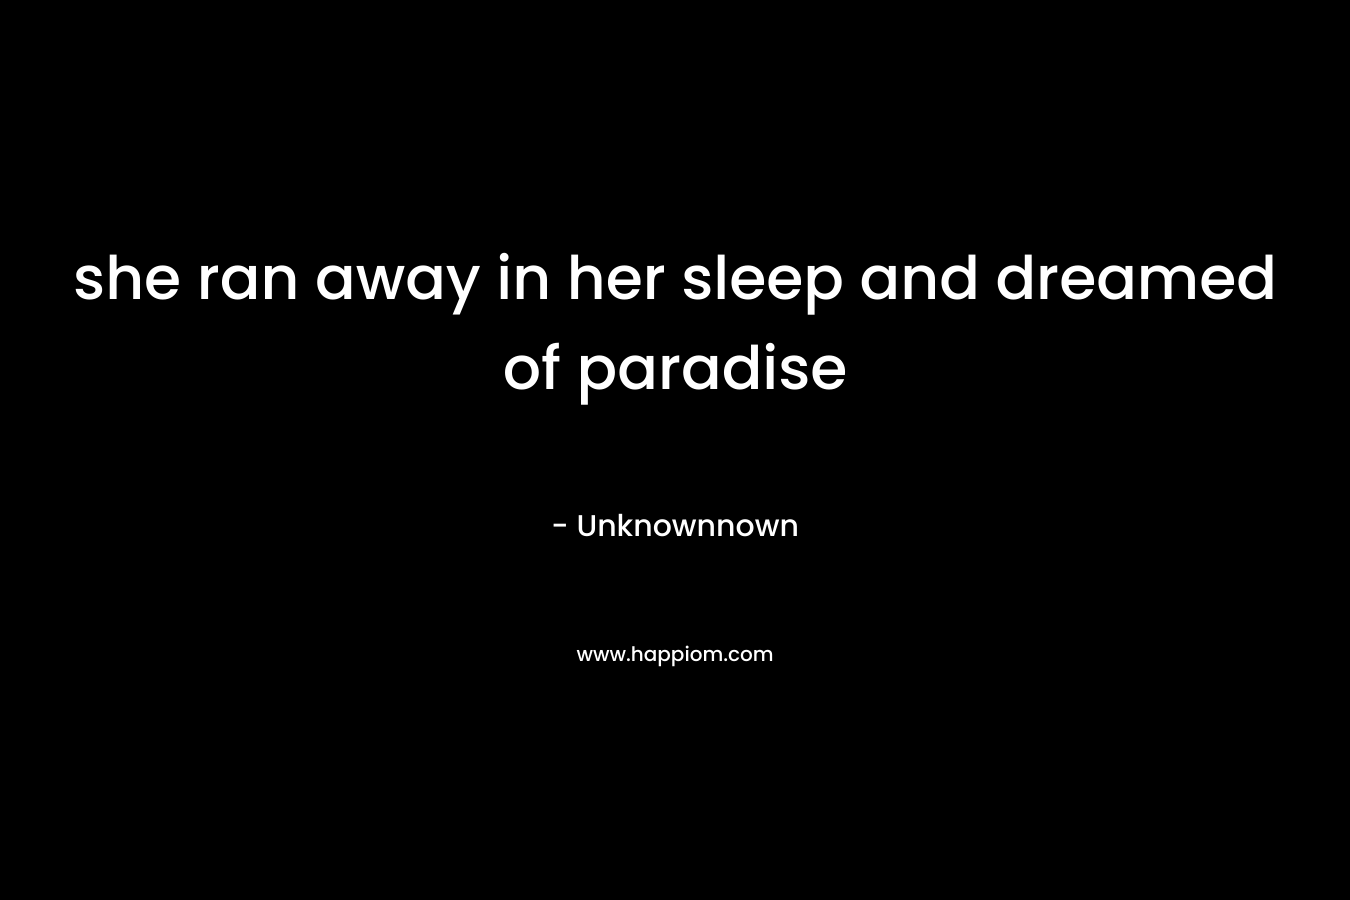 she ran away in her sleep and dreamed of paradise – Unknownnown